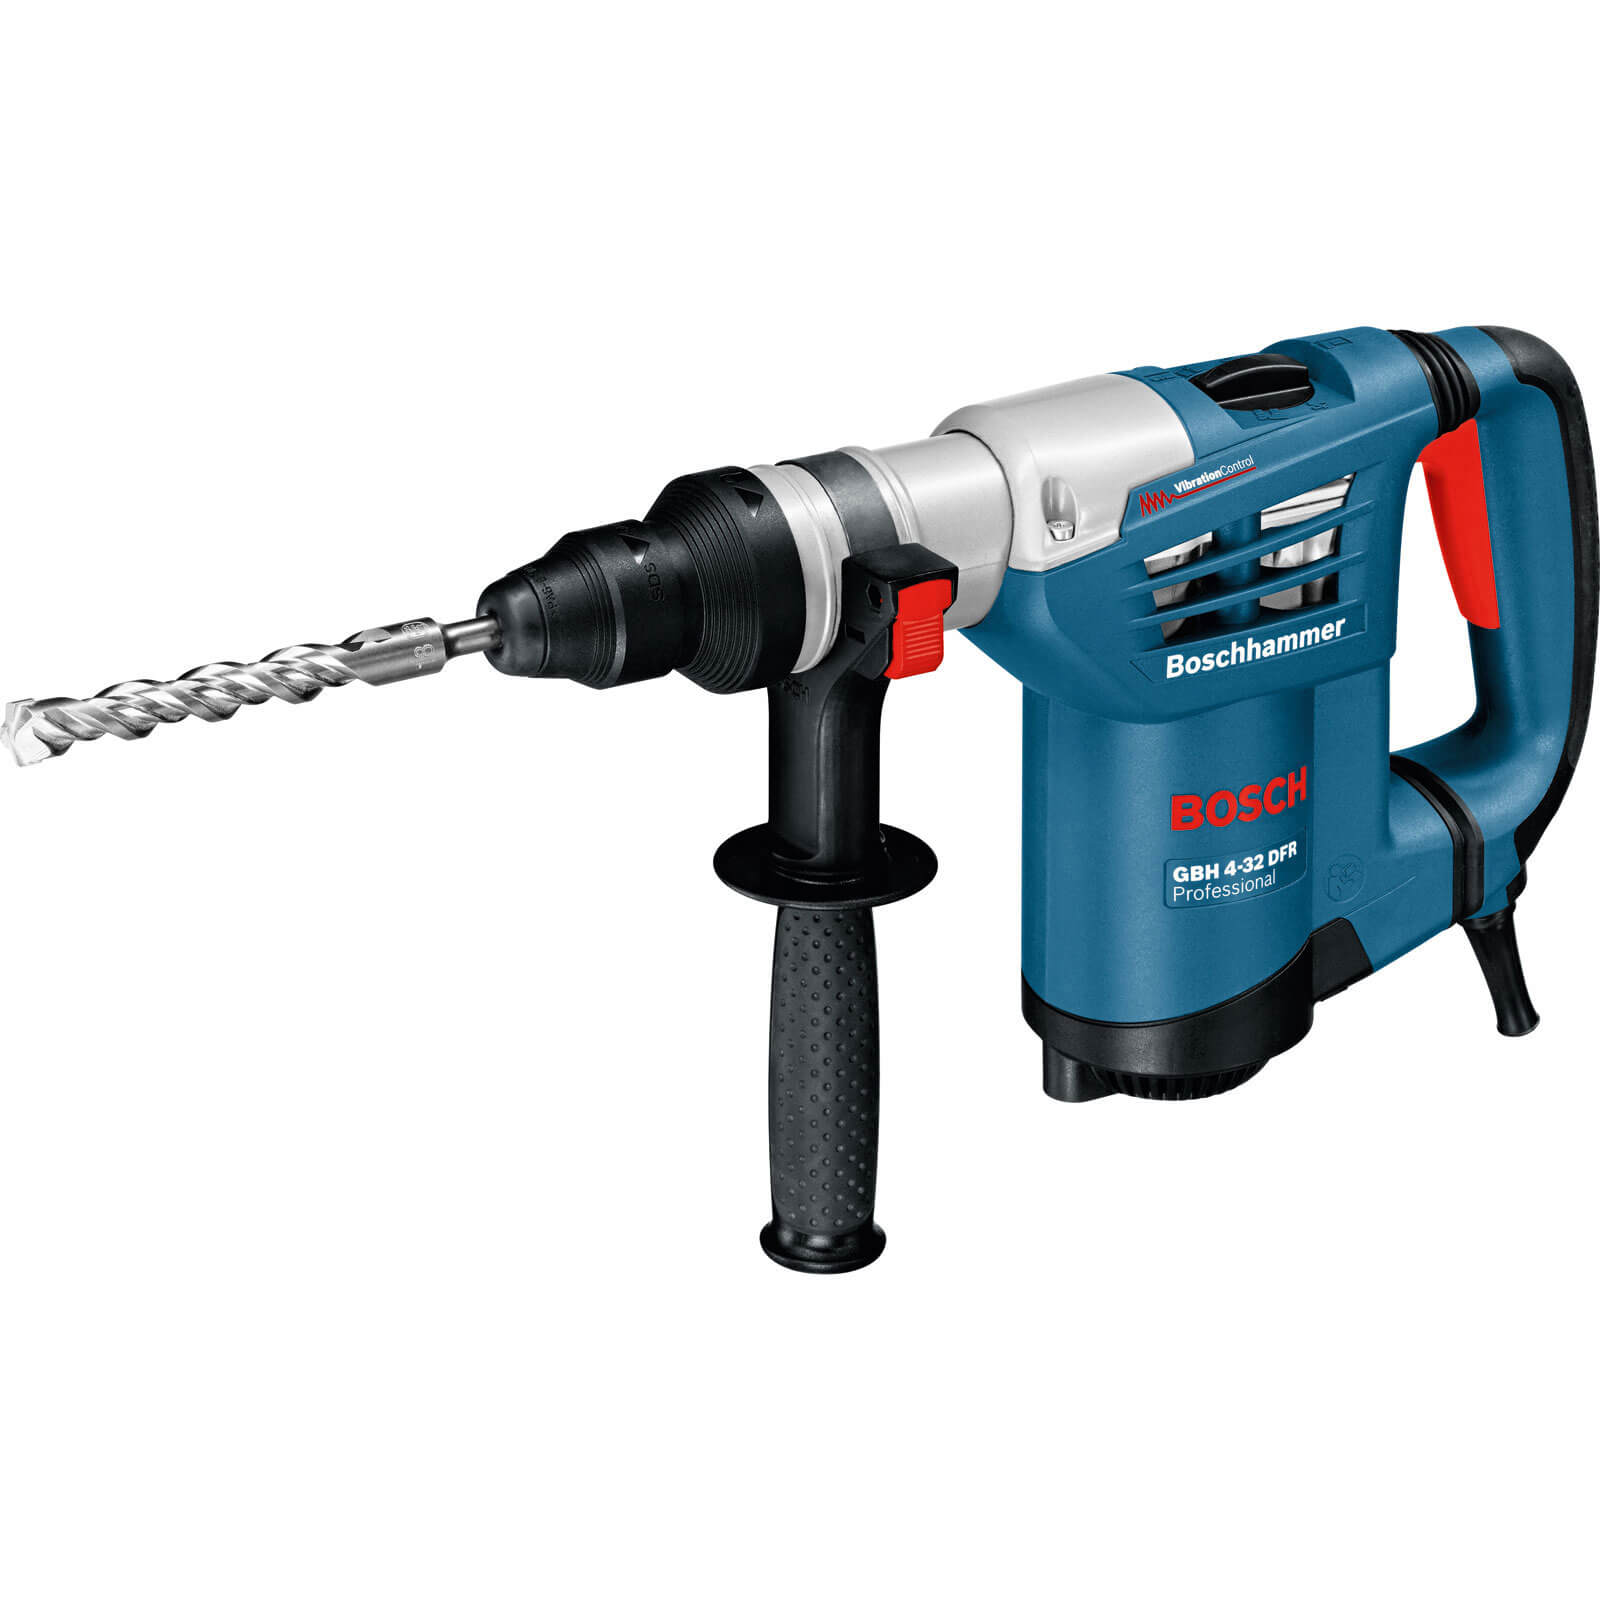 Photo of Bosch Gbh 4 32 Dfr Sds Plus Rotary Hammer Drill 110v